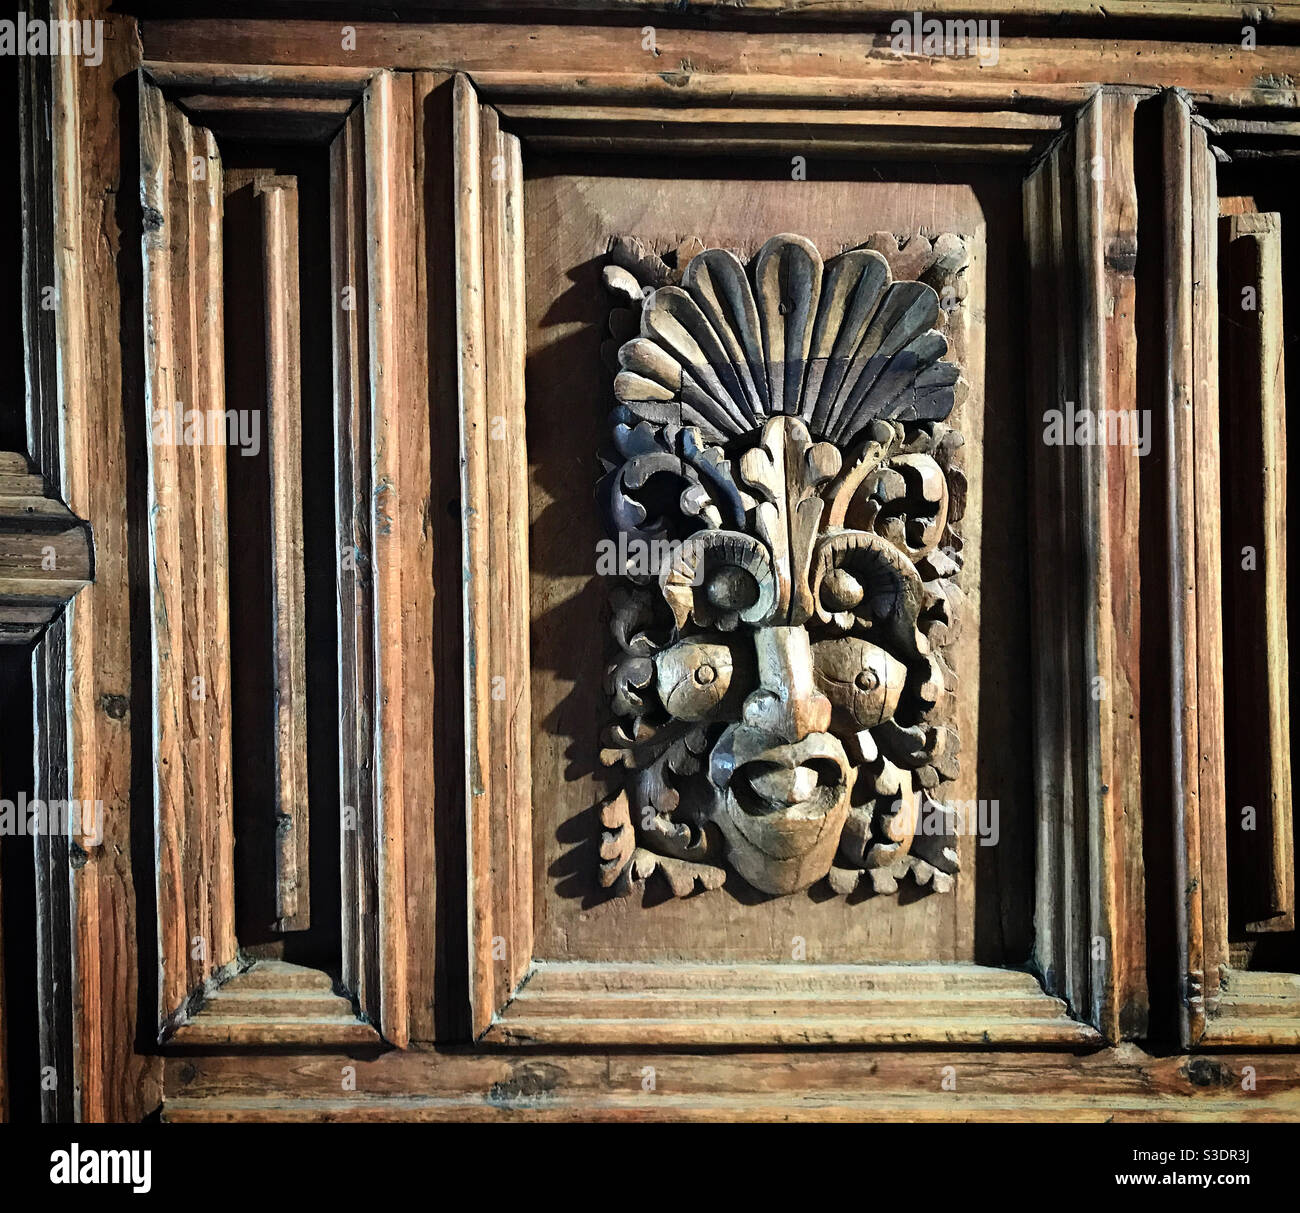 An indigenous figure decorates a door in the church of Araro, Michoacan, Mexico Stock Photo